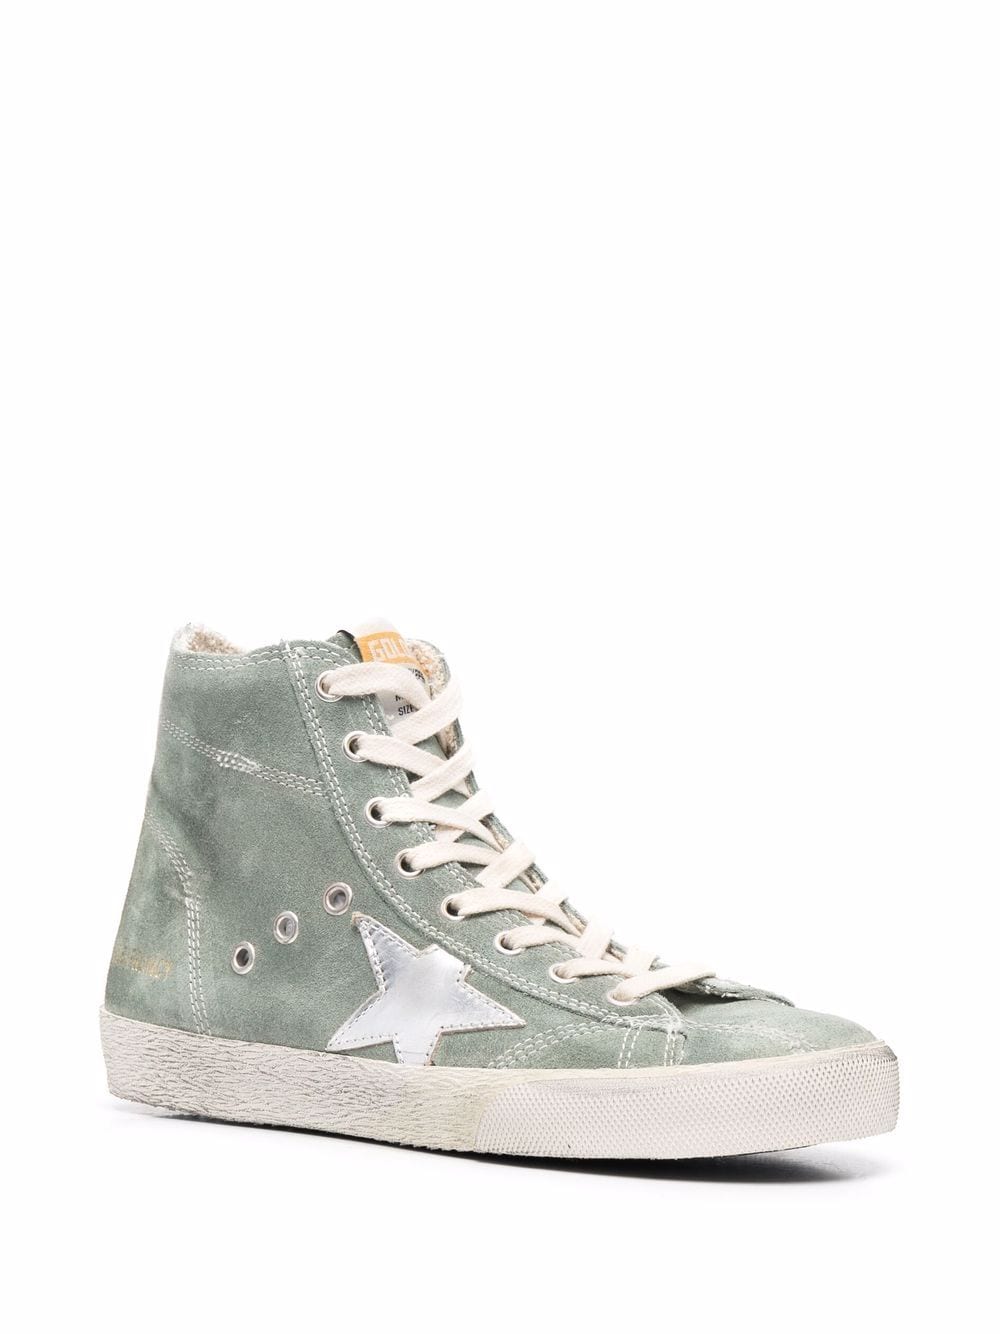 Golden Goose Deluxe Brand Sneakers Francy Military Green Soho-Boutique